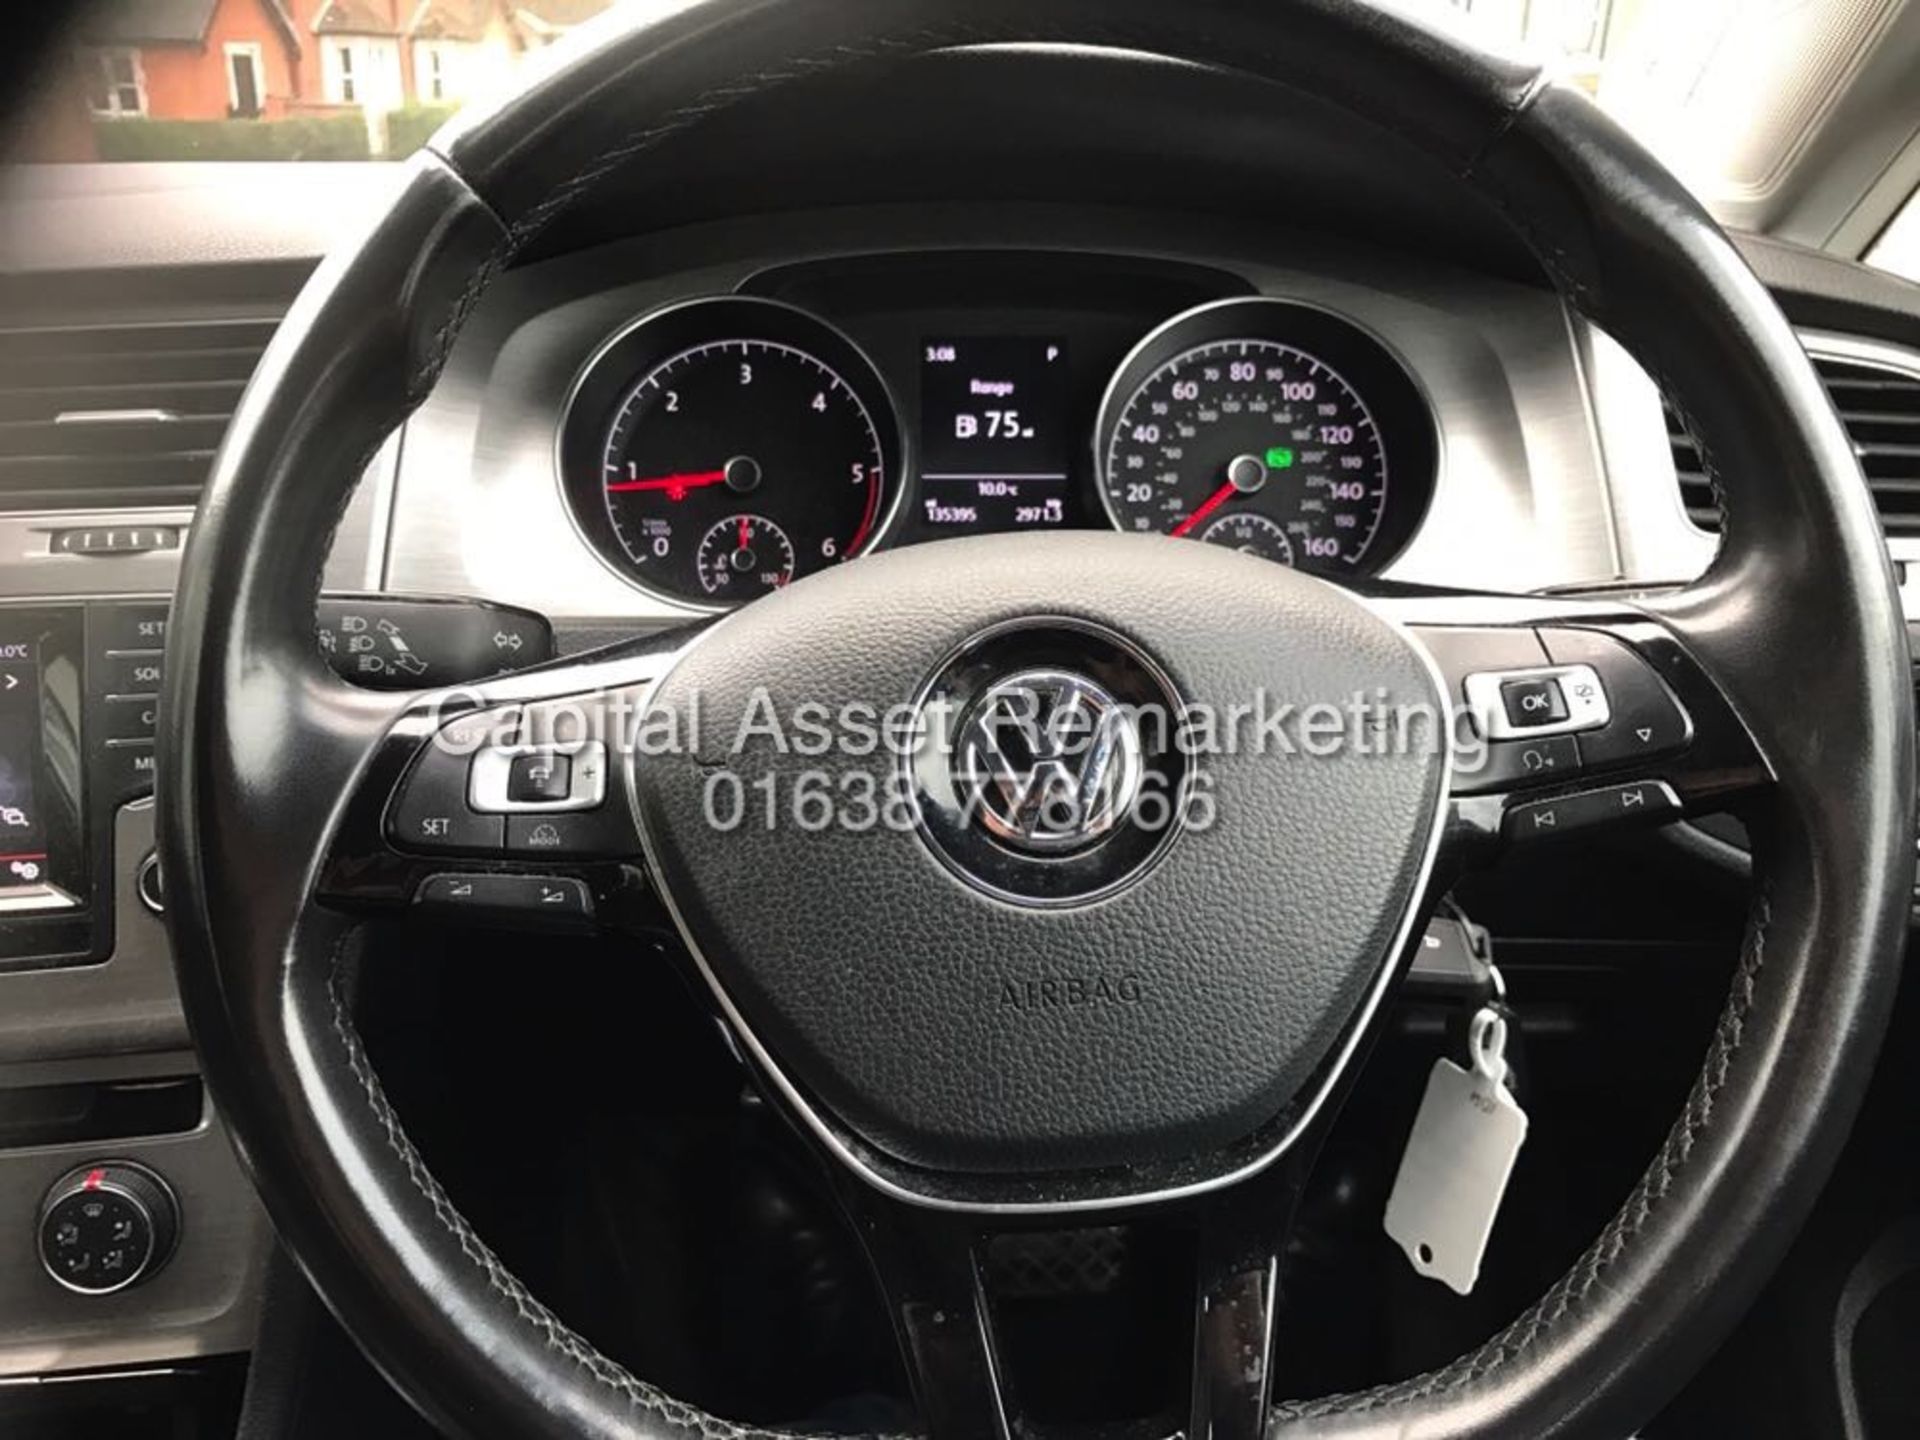 (ON SALE) VOLKSWAGEN GOLF 1.6TDI 7 SPEED DSG "SPECIAL EQUIPMENT" AIR CON - STOP/START-ELECTRIC PACK - Image 10 of 13